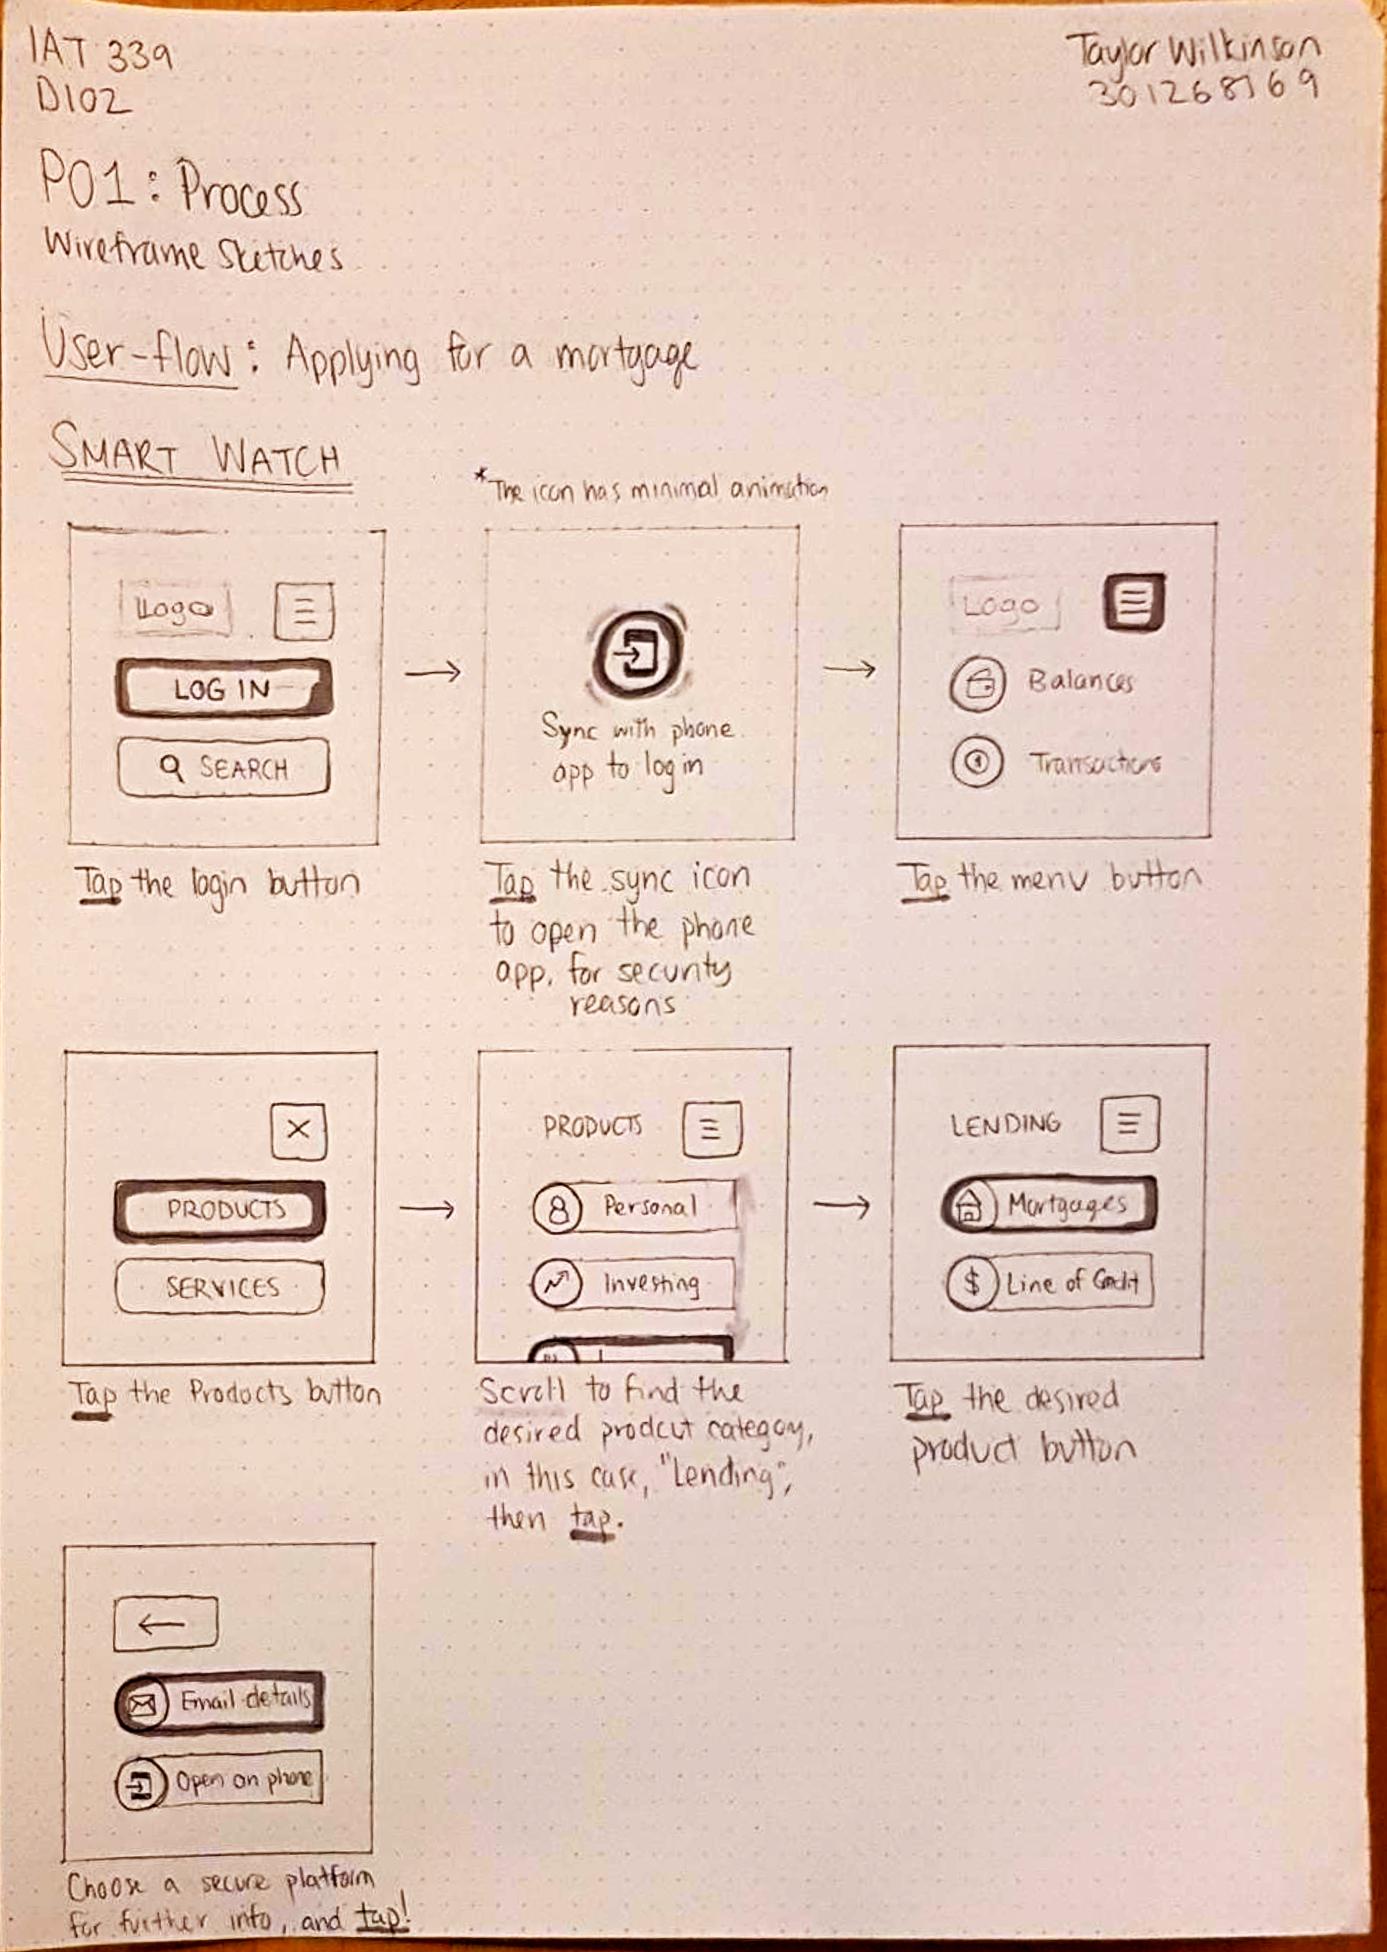 Userflow sketches for watch